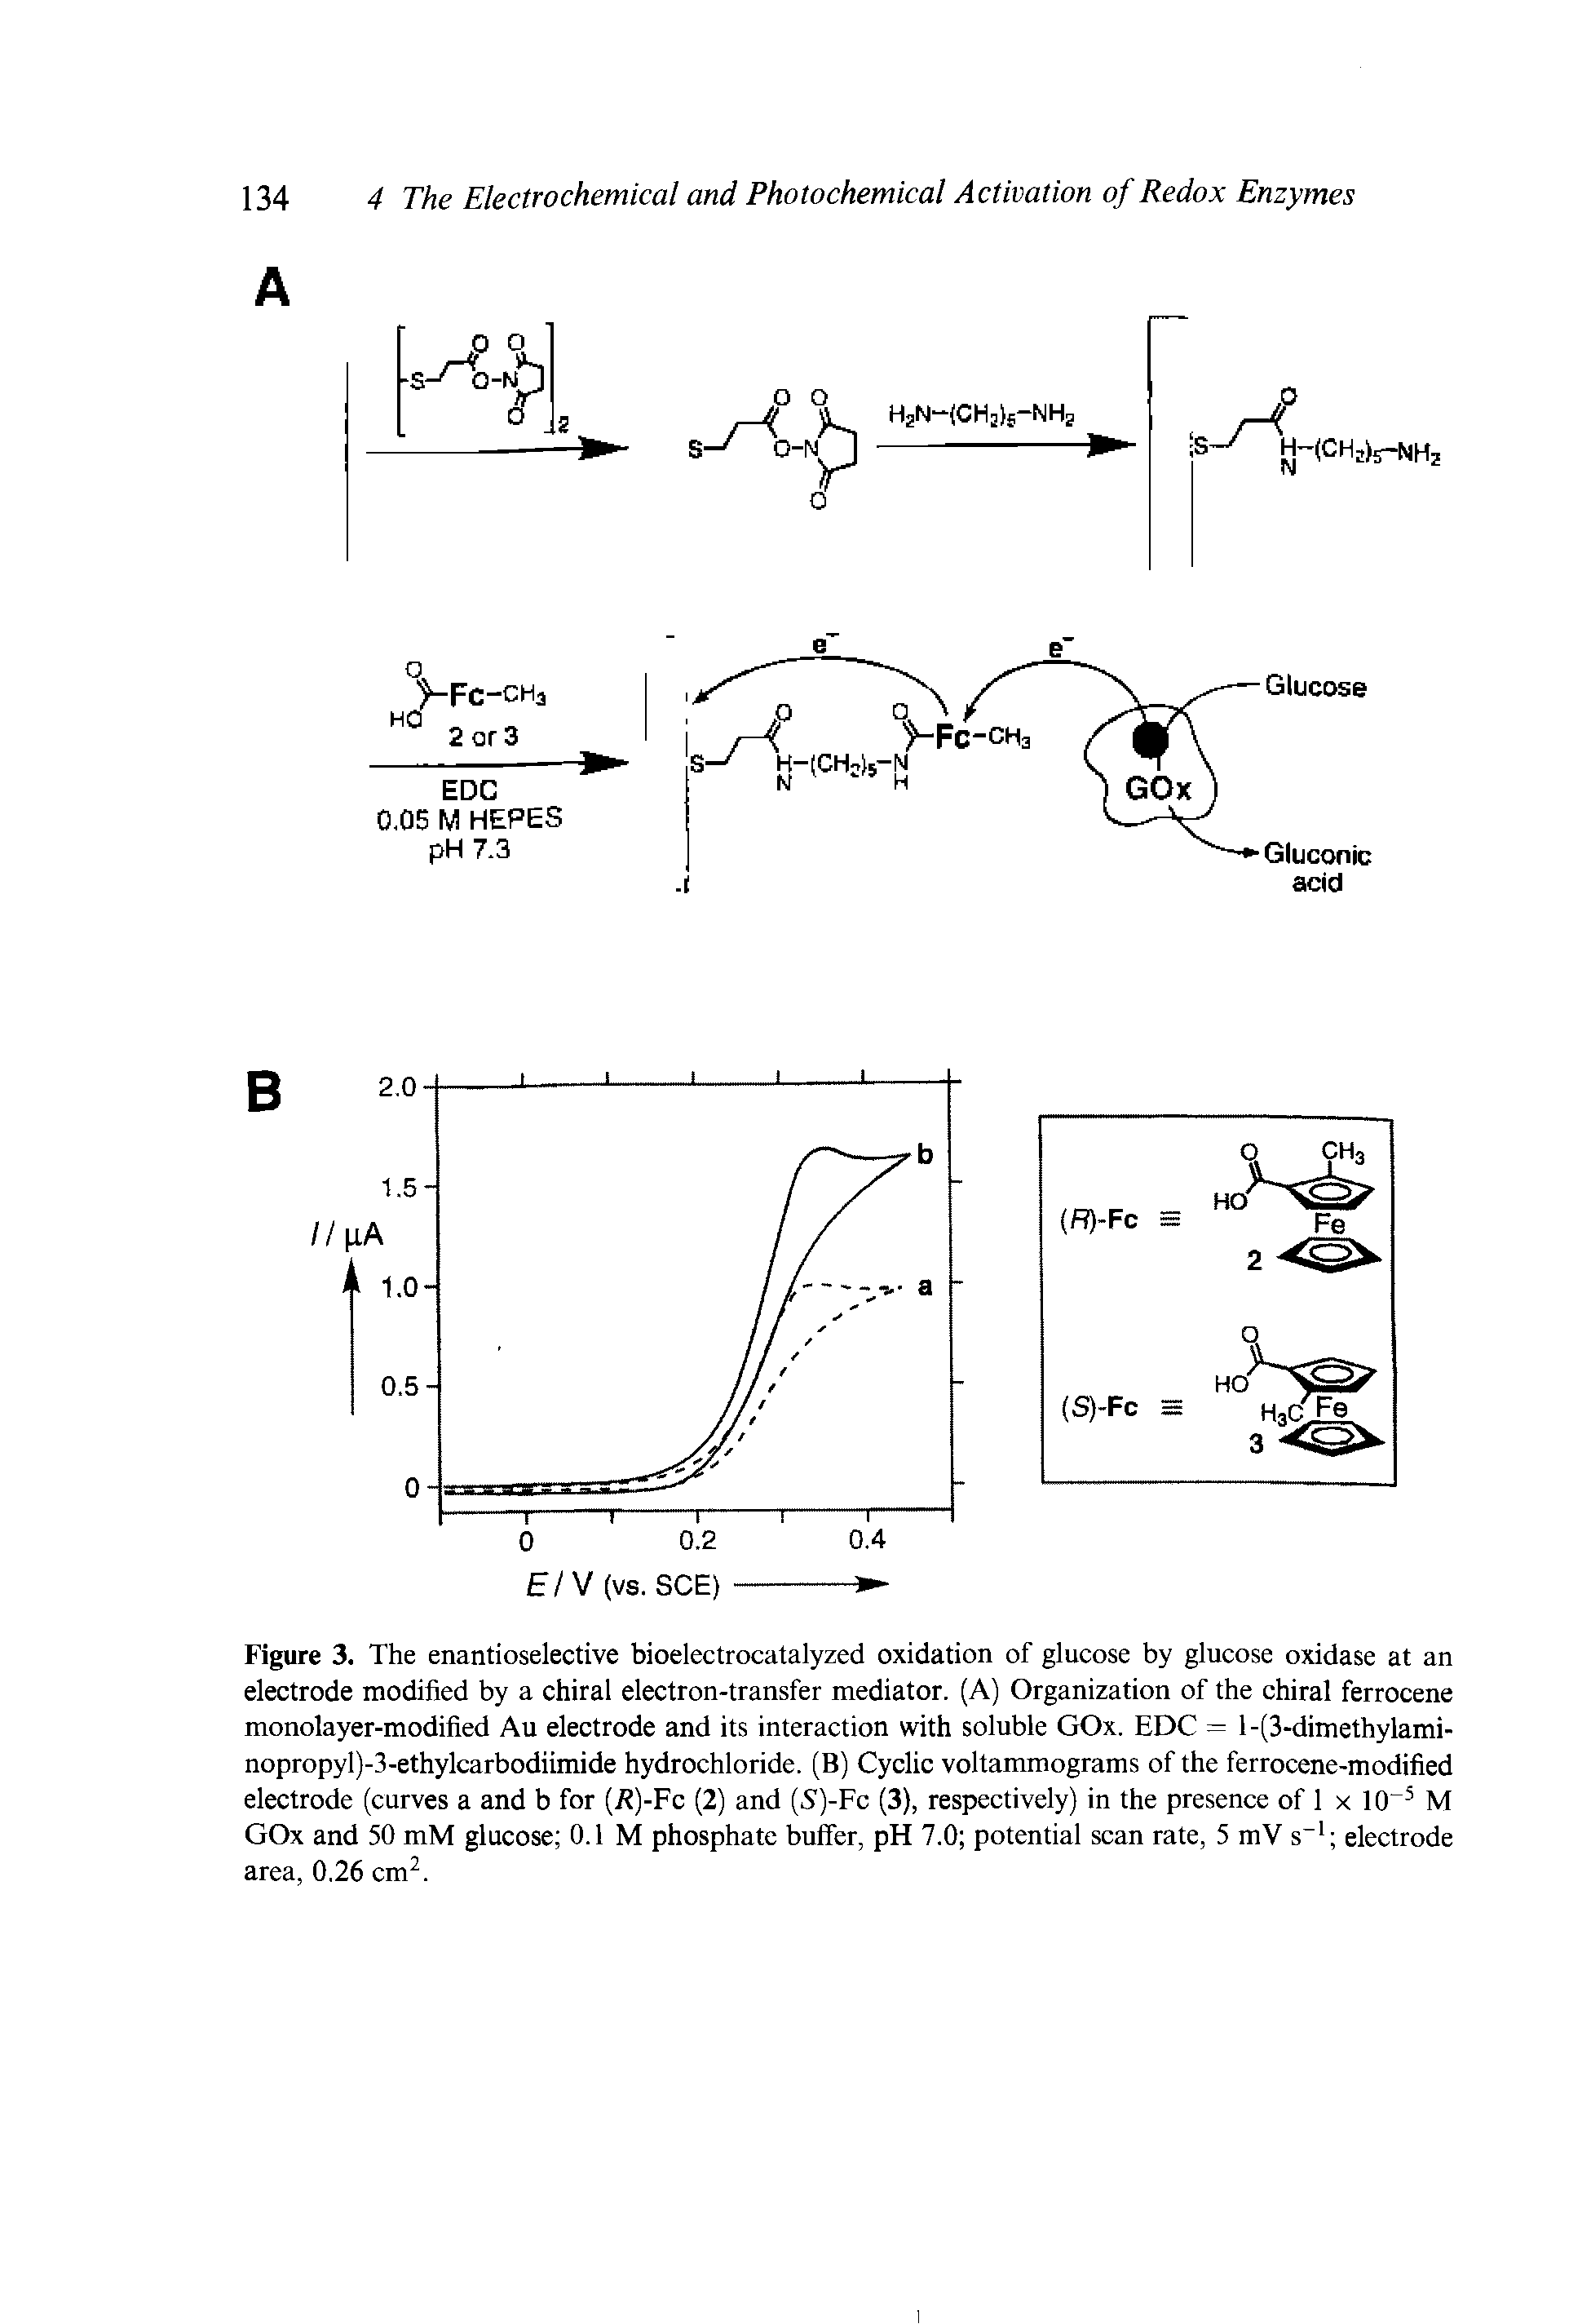 Figure 3. The enantioselective bioelectrocatalyzed oxidation of glucose by glucose oxidase at an electrode modified by a chiral electron-transfer mediator. (A) Organization of the chiral ferrocene monolayer-modified Au electrode and its interaction with soluble GOx. EDC = l-(3-dimethylami-nopropyl)-3-ethylcarbodiimide hydrochloride. (B) Cyclic voltammograms of the ferrocene-modified electrode (curves a and b for (i )-Fc (2) and (5)-Fc (3), respectively) in the presence of 1 x 10 M GOx and 50 mM glucose 0.1 M phosphate buffer, pH 7.0 potential scan rate, 5 mV s electrode area, 0.26 cm. ...